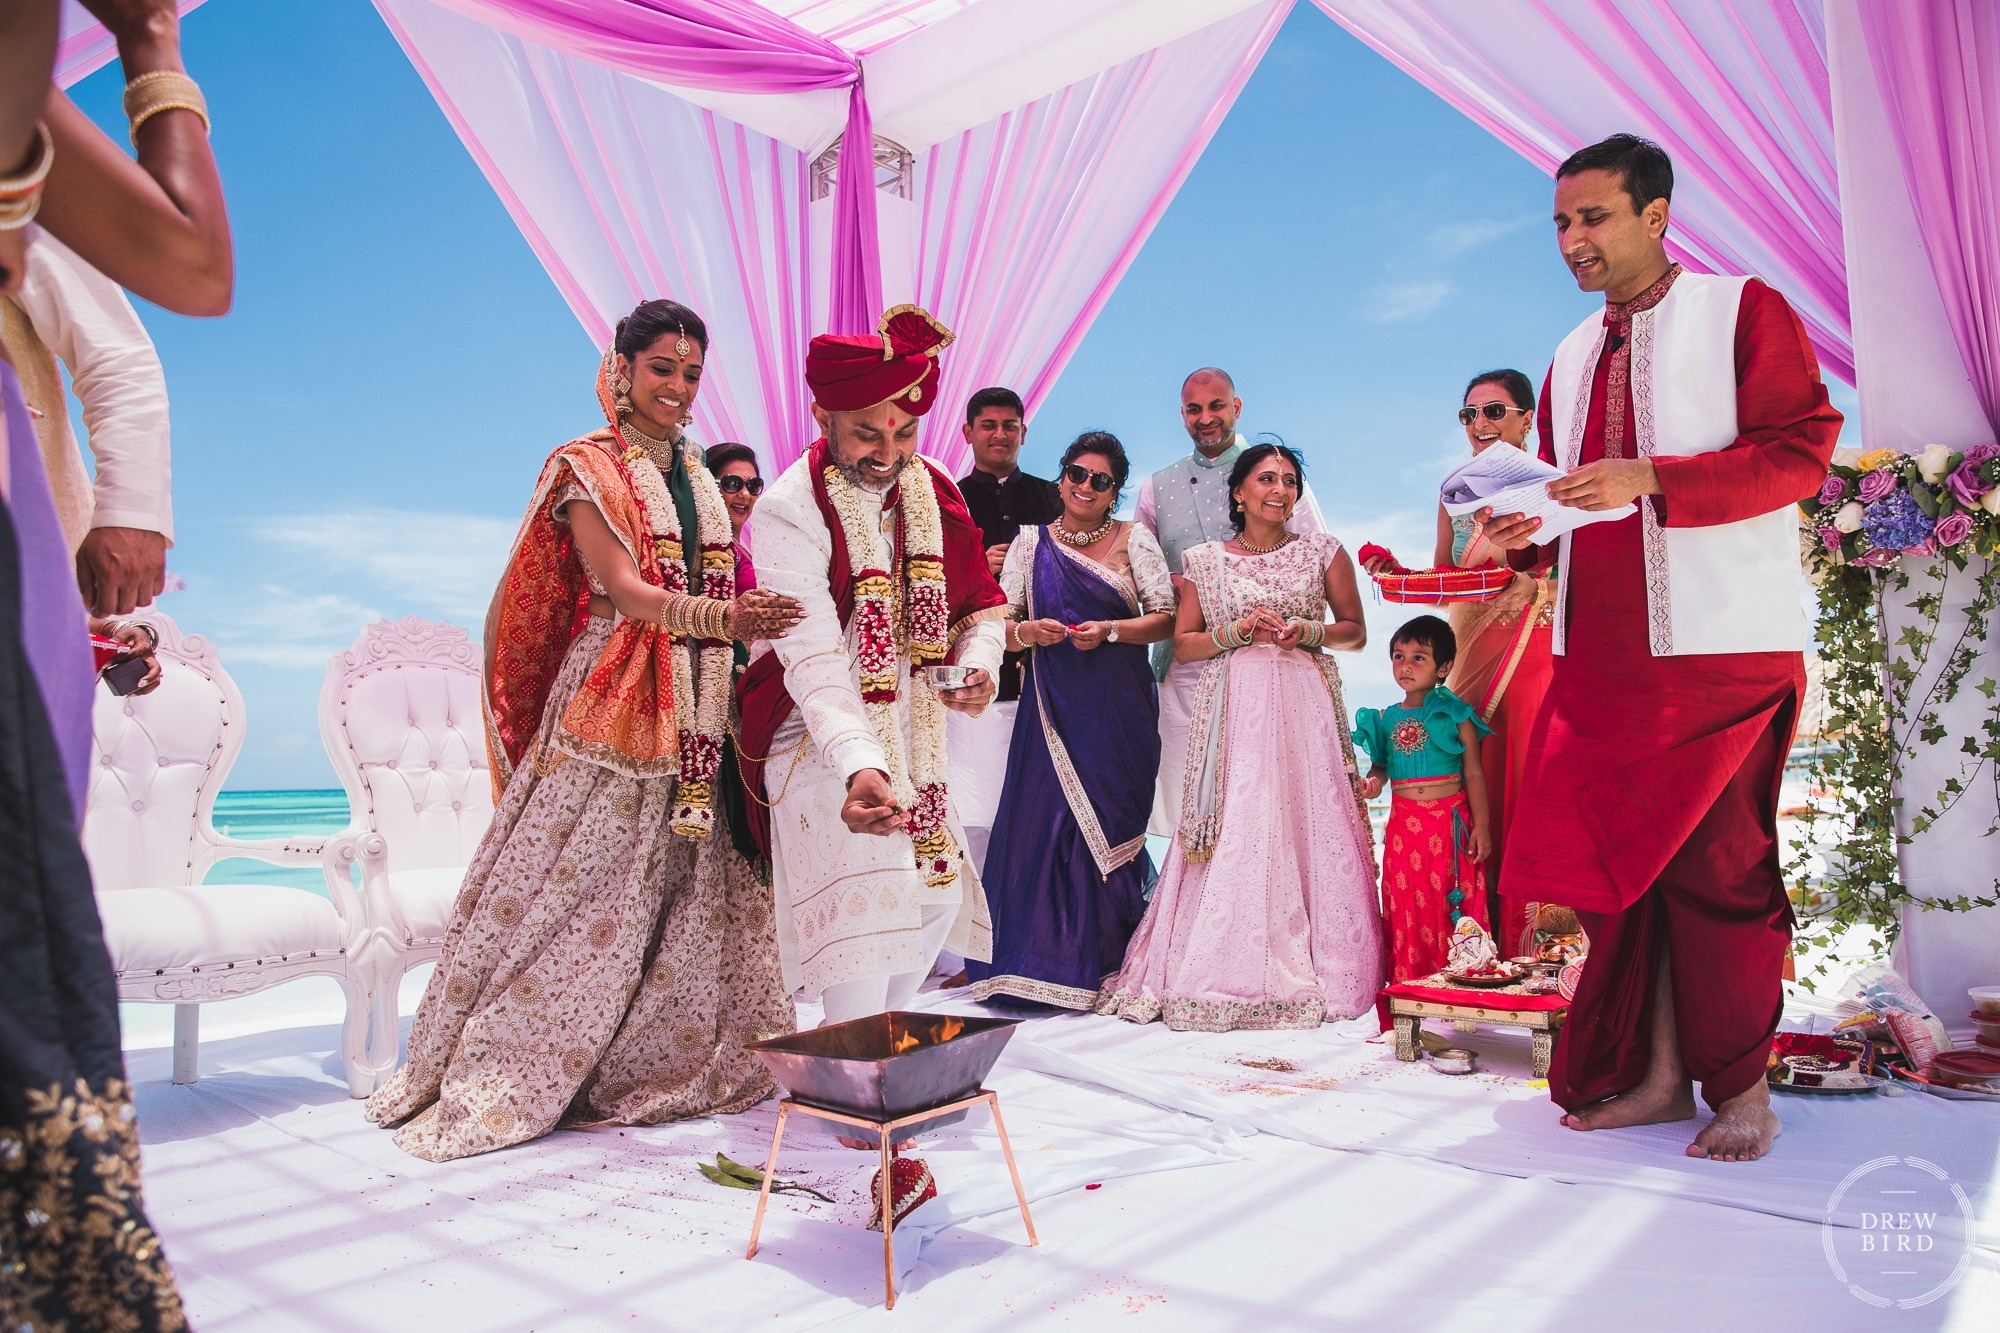 Bride and groom toss rice into an open fire under a pink Mandap with blue sky and ocean in the background for a Hindu Indian wedding ceremony on the beach at the Hilton Aruba resort by professional wedding photographer Drew Bird.